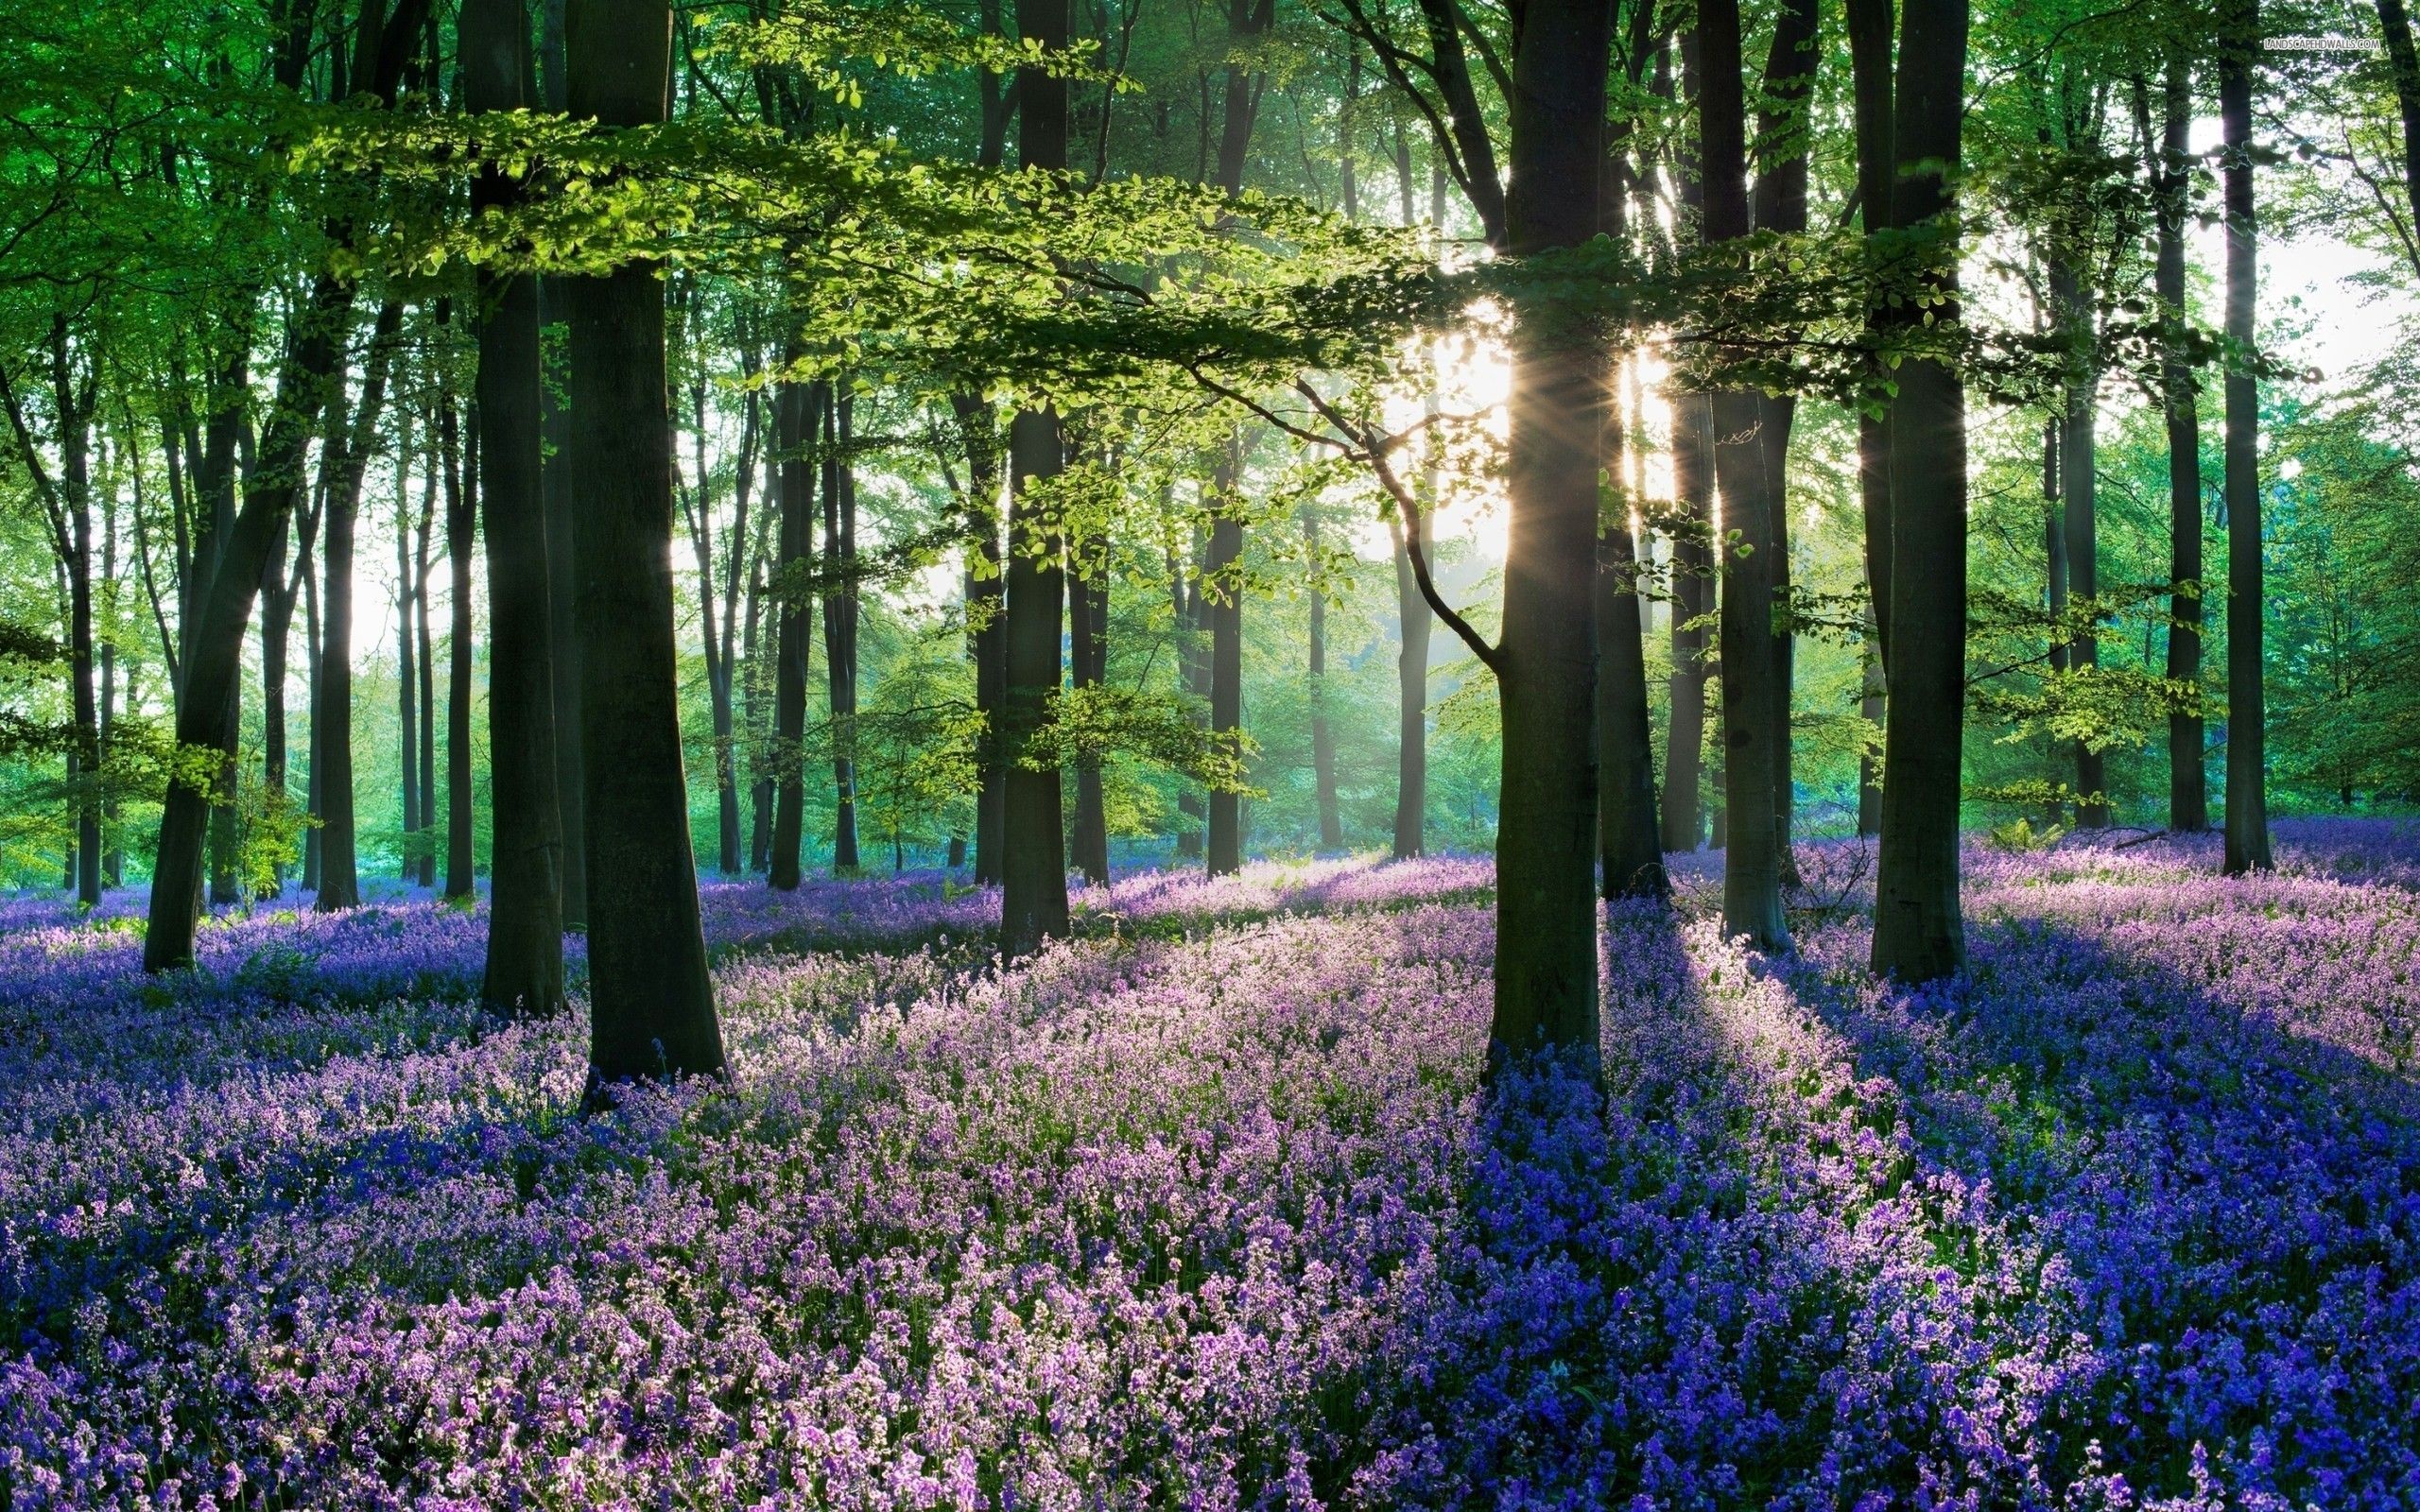 Woods Wallpaper. Lavender in the Woods. Forest wallpaper, Nature